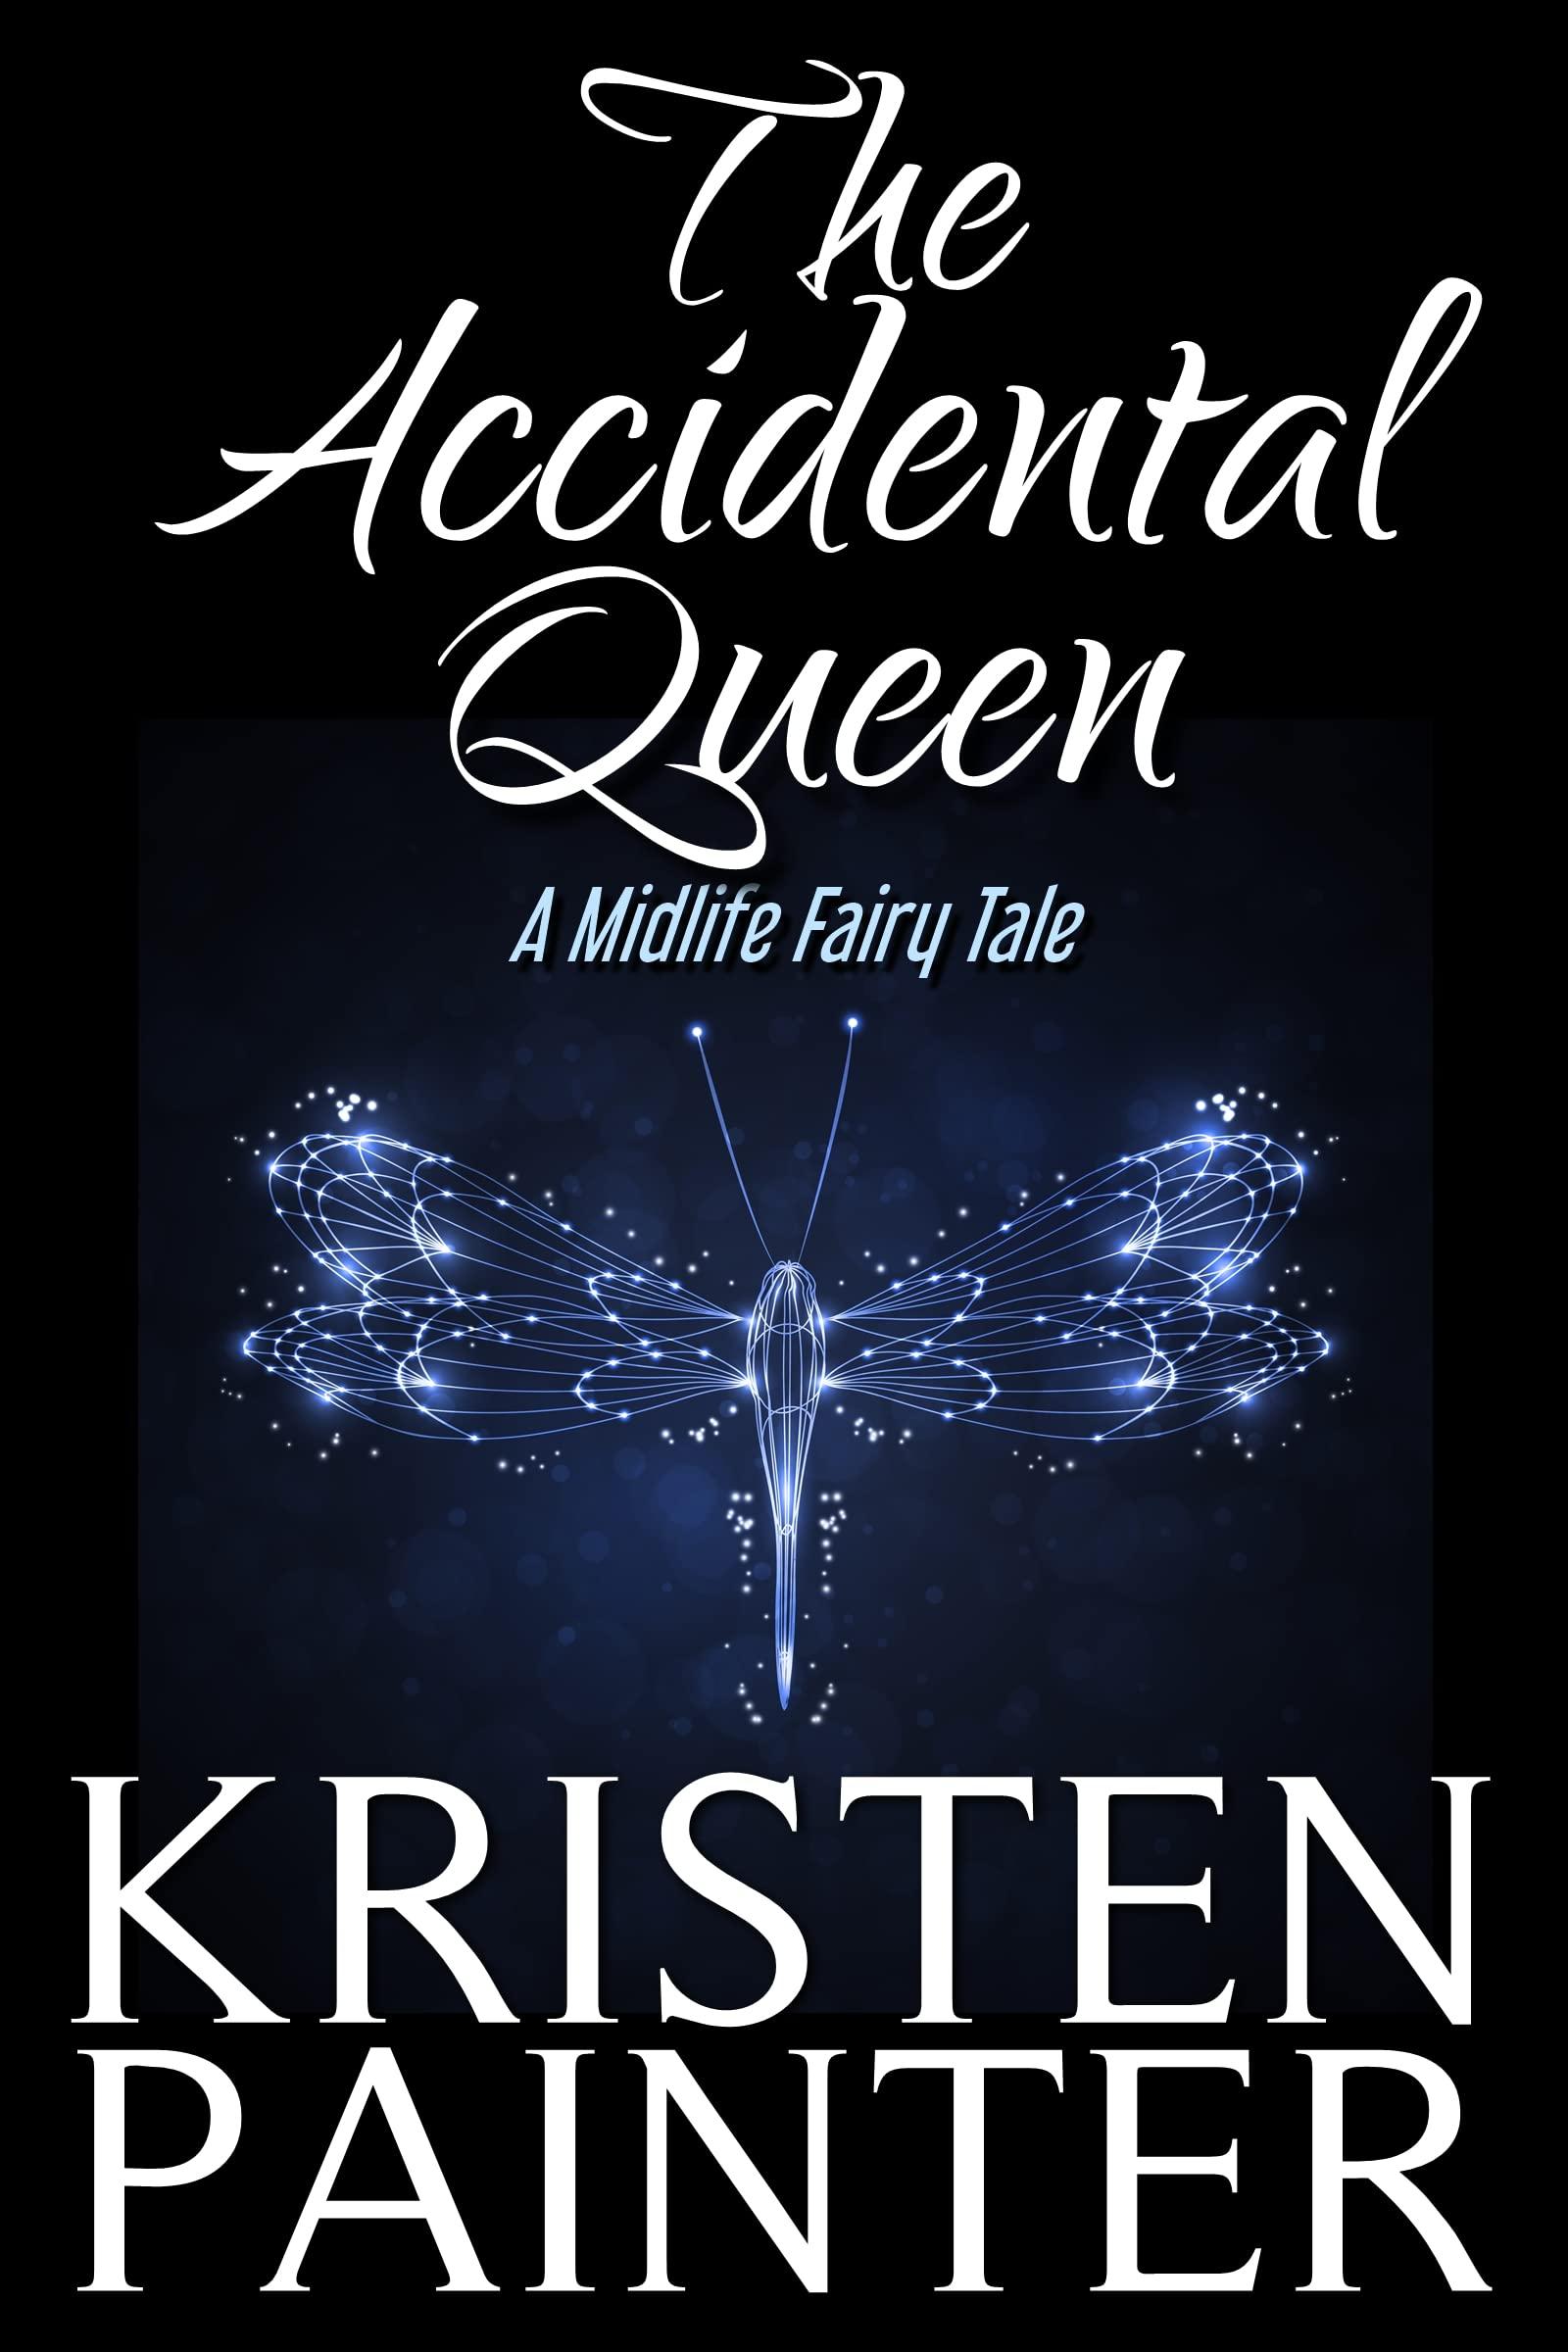 The Accidental Queen: A Midlife Fairy Tale